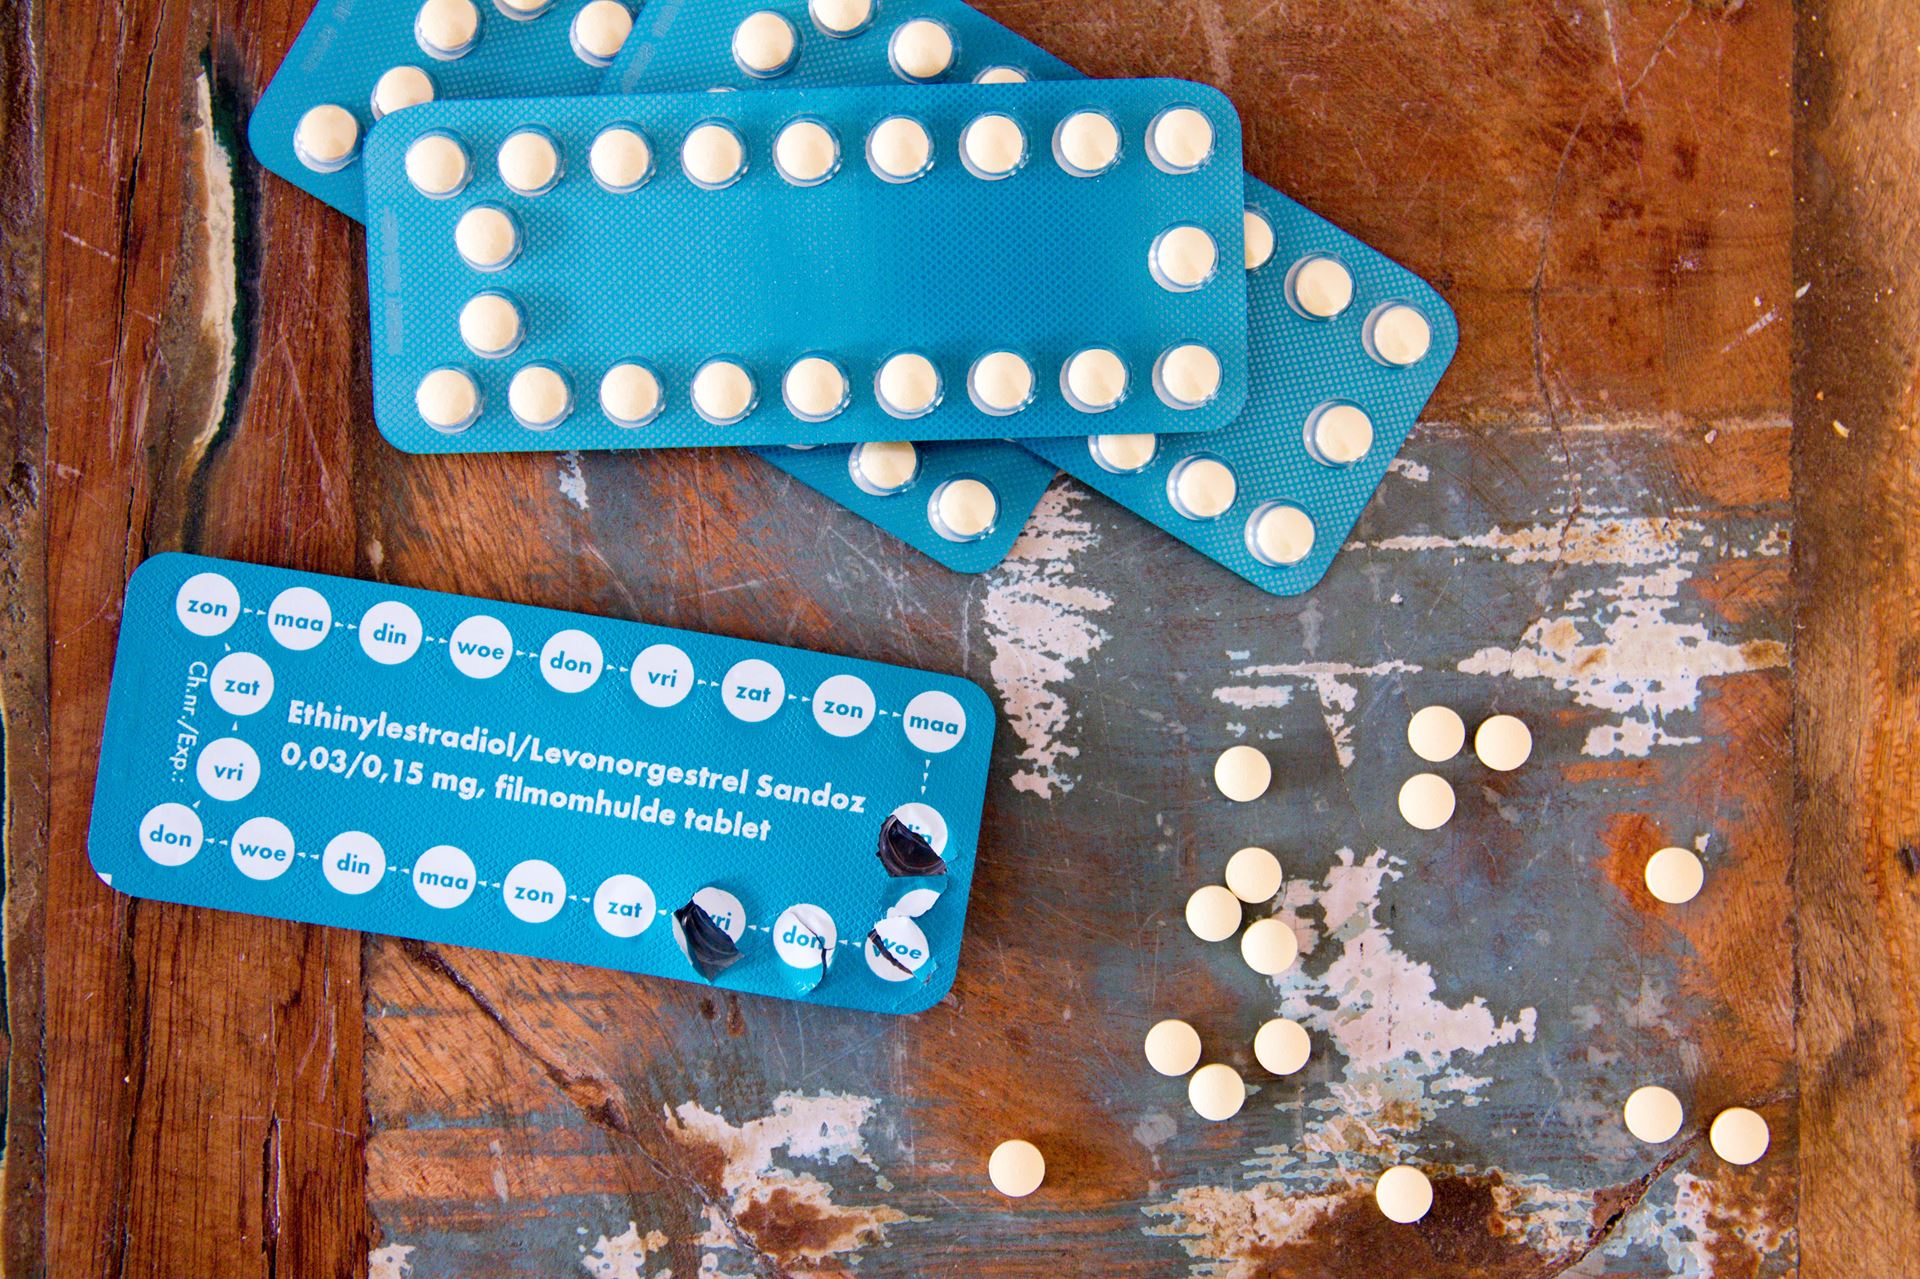 Some contraceptive pills in their packets on a wooden surface